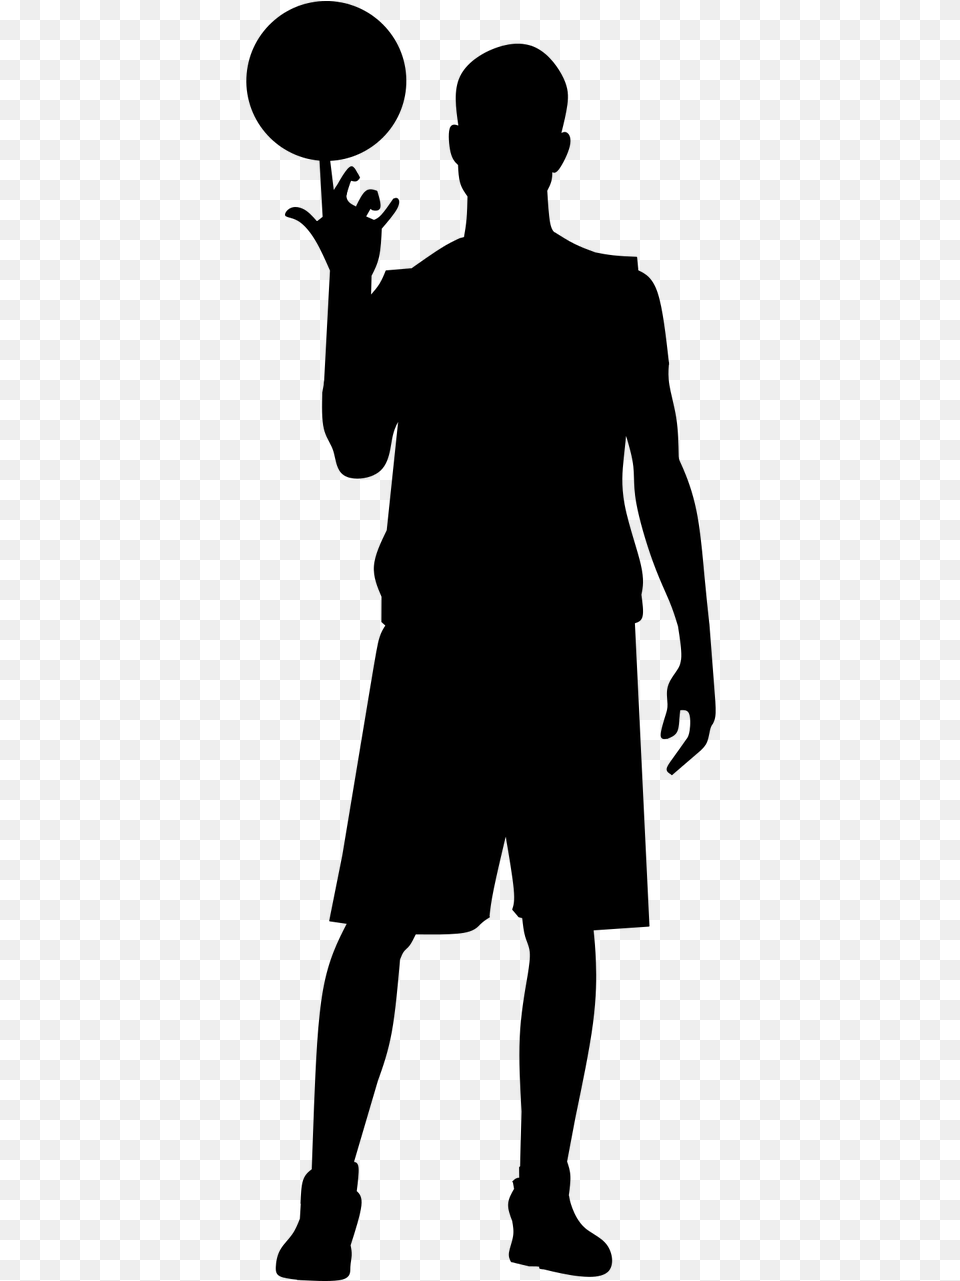 Basketball Player Holding Ball Silhouette, Gray Free Png Download